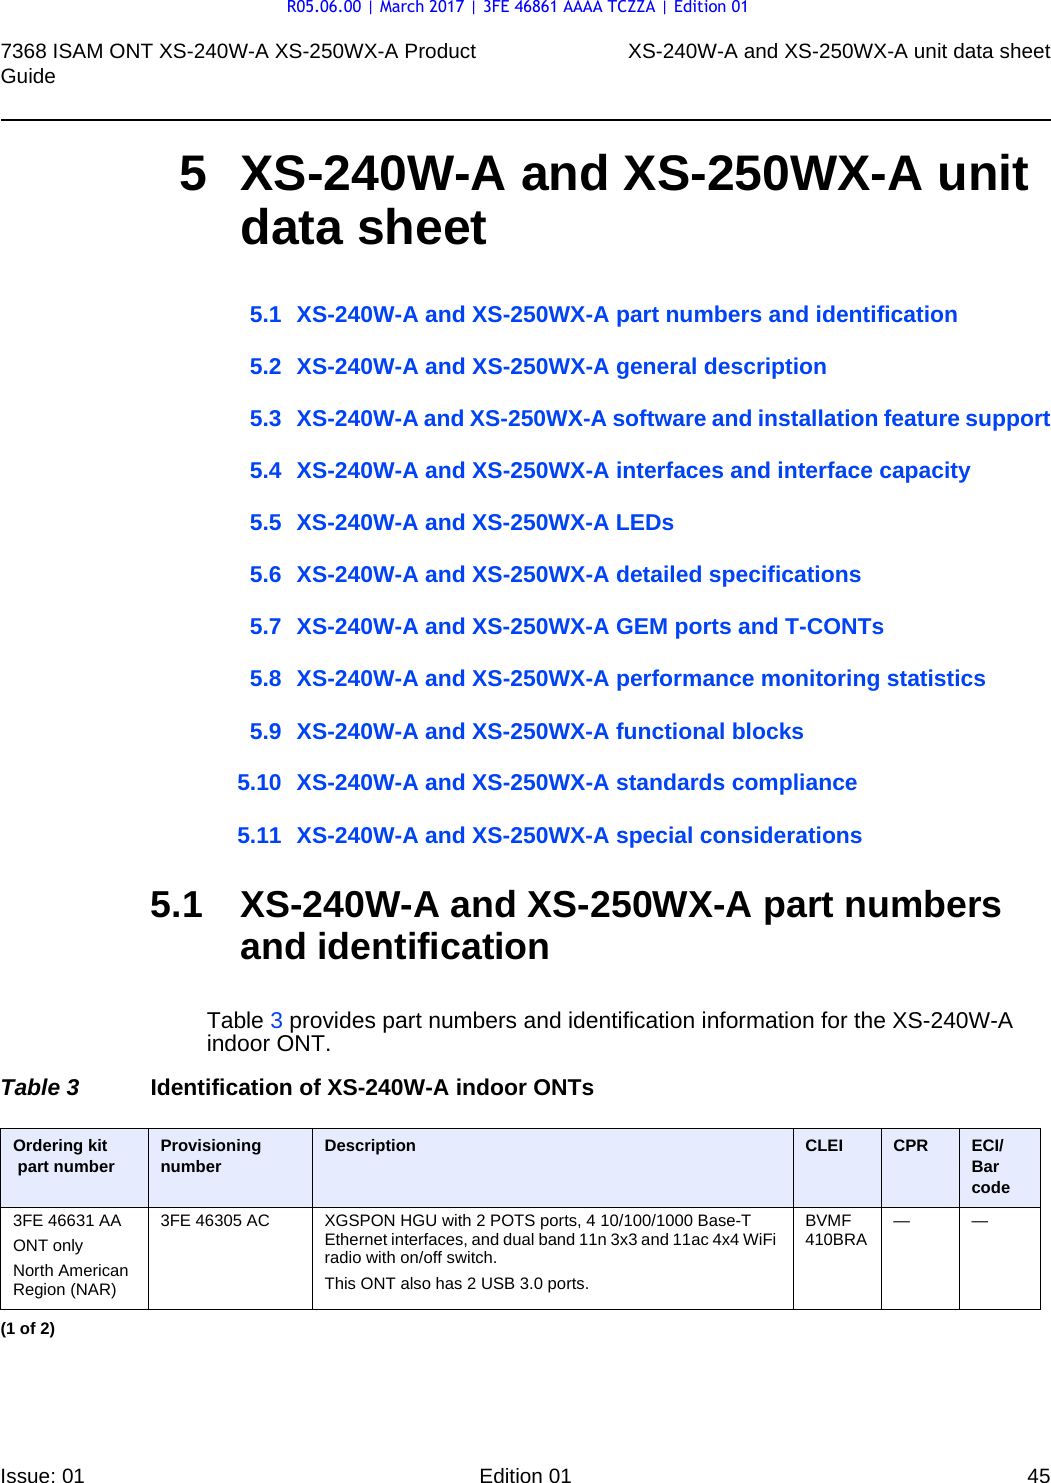 7368 ISAM ONT XS-240W-A XS-250WX-A Product Guide XS-240W-A and XS-250WX-A unit data sheetIssue: 01 Edition 01 45 5 XS-240W-A and XS-250WX-A unit data sheet5.1 XS-240W-A and XS-250WX-A part numbers and identification5.2 XS-240W-A and XS-250WX-A general description5.3 XS-240W-A and XS-250WX-A software and installation feature support5.4 XS-240W-A and XS-250WX-A interfaces and interface capacity5.5 XS-240W-A and XS-250WX-A LEDs5.6 XS-240W-A and XS-250WX-A detailed specifications5.7 XS-240W-A and XS-250WX-A GEM ports and T-CONTs5.8 XS-240W-A and XS-250WX-A performance monitoring statistics5.9 XS-240W-A and XS-250WX-A functional blocks5.10 XS-240W-A and XS-250WX-A standards compliance5.11 XS-240W-A and XS-250WX-A special considerations5.1 XS-240W-A and XS-250WX-A part numbers and identificationTable 3 provides part numbers and identification information for the XS-240W-A indoor ONT.Table 3 Identification of XS-240W-A indoor ONTsOrdering kit part number Provisioning number Description CLEI CPR ECI/Bar code3FE 46631 AAONT onlyNorth American Region (NAR)3FE 46305 AC XGSPON HGU with 2 POTS ports, 4 10/100/1000 Base-T Ethernet interfaces, and dual band 11n 3x3 and 11ac 4x4 WiFi radio with on/off switch.This ONT also has 2 USB 3.0 ports.BVMF 410BRA ——(1 of 2)R05.06.00 | March 2017 | 3FE 46861 AAAA TCZZA | Edition 01